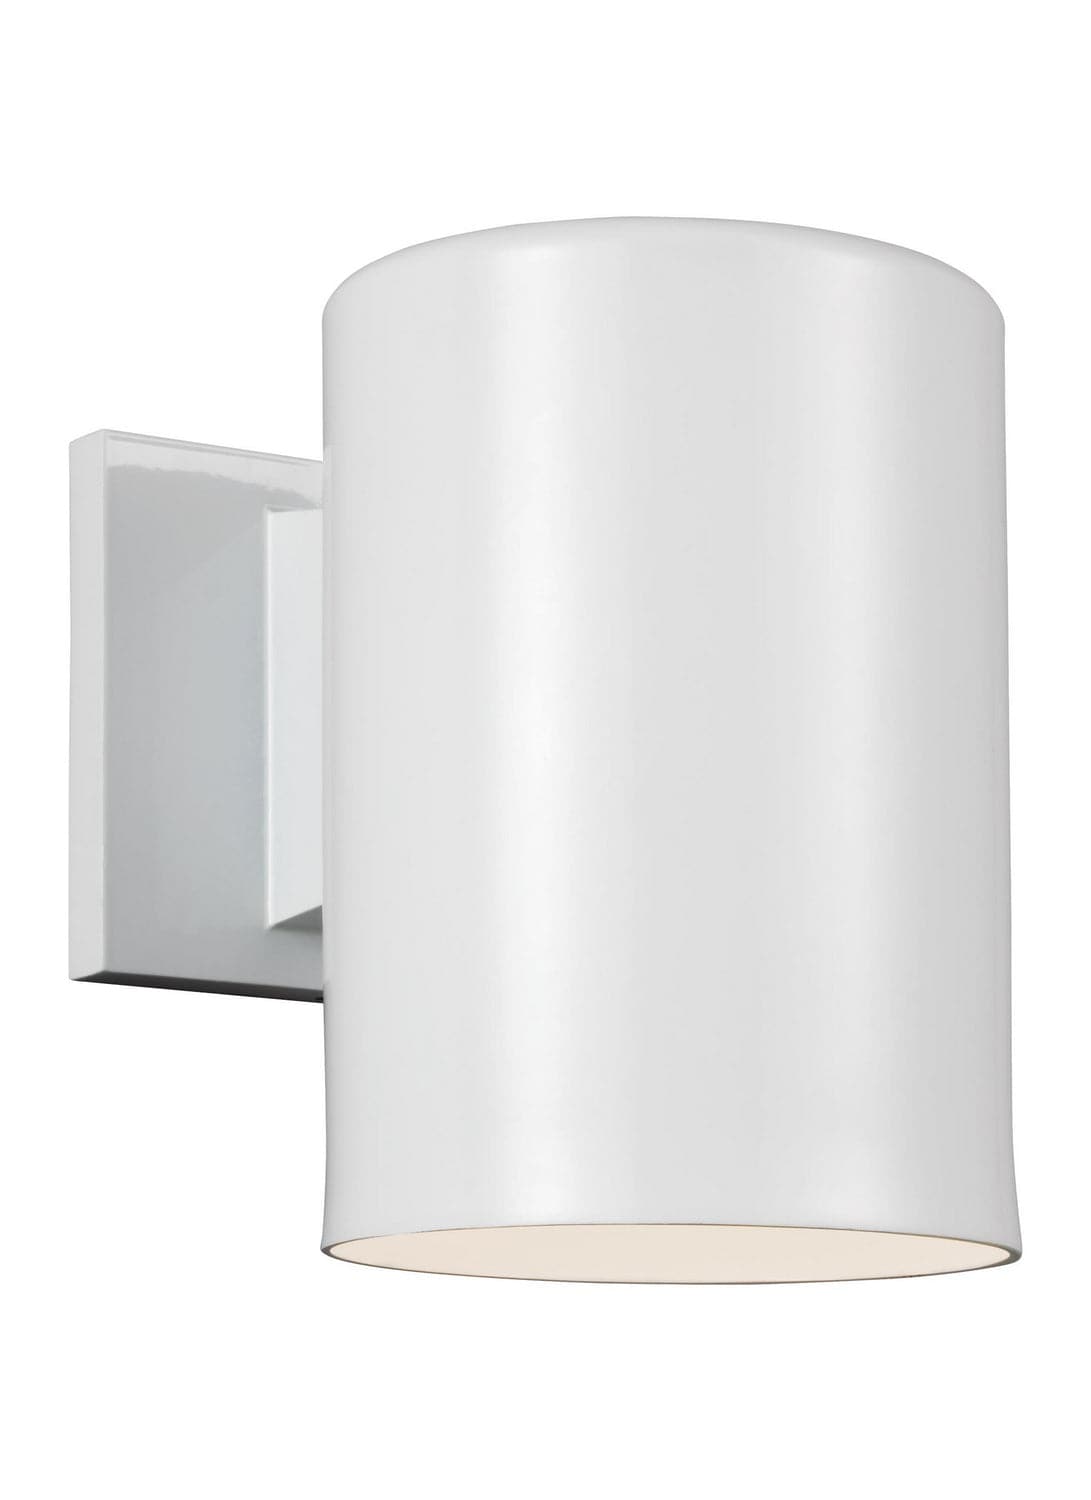 Visual Comfort Studio - 8313801-15 - One Light Outdoor Wall Lantern - Outdoor Cylinders - White